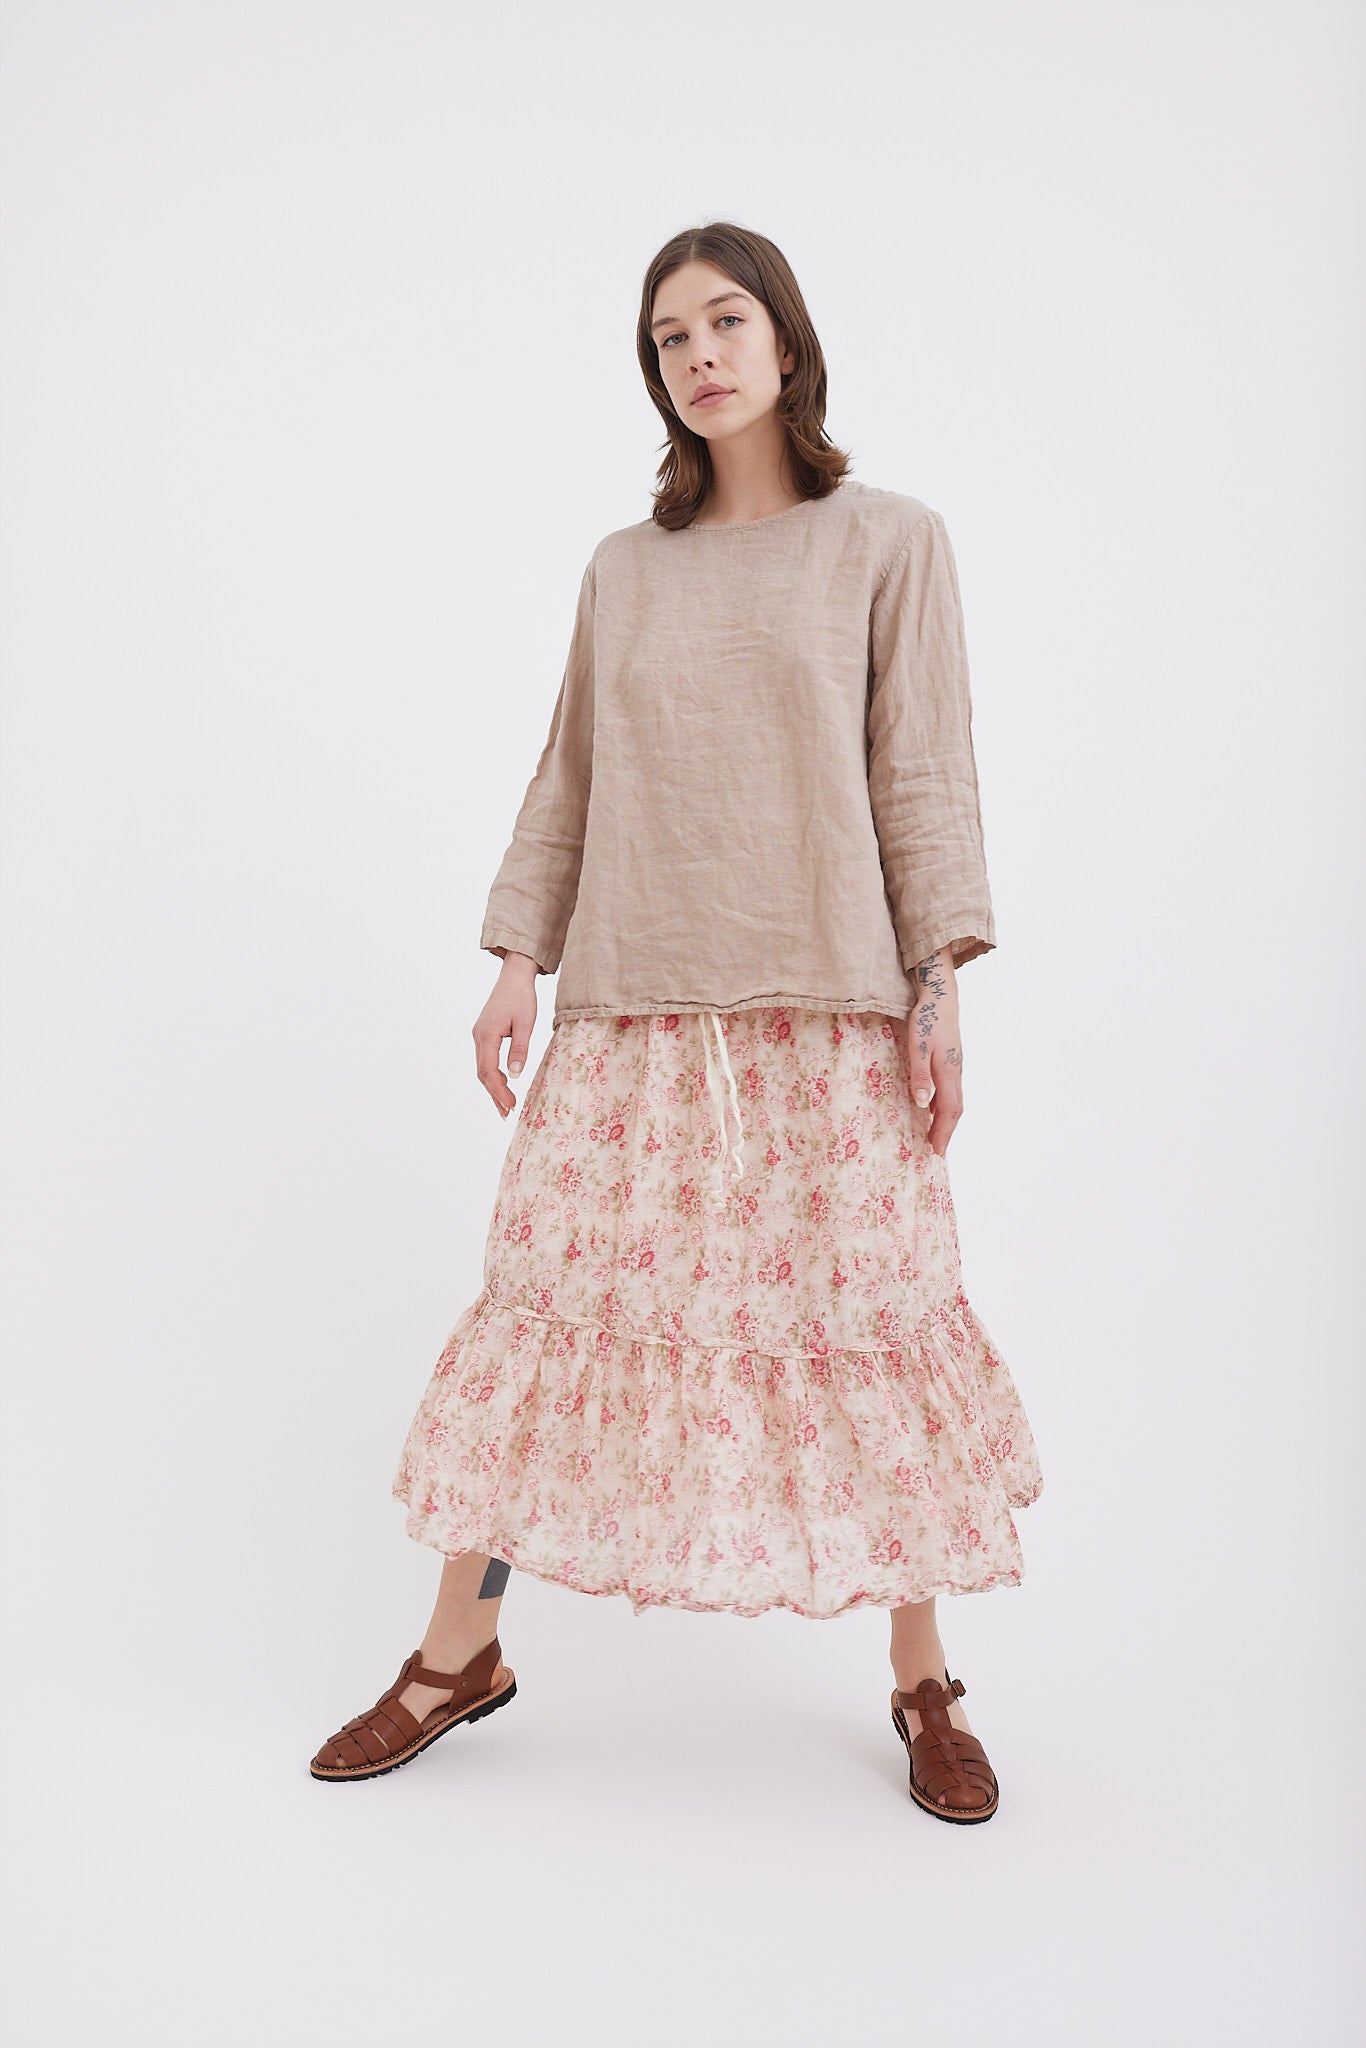 Milly Tiered Skirt - La Petite Rose